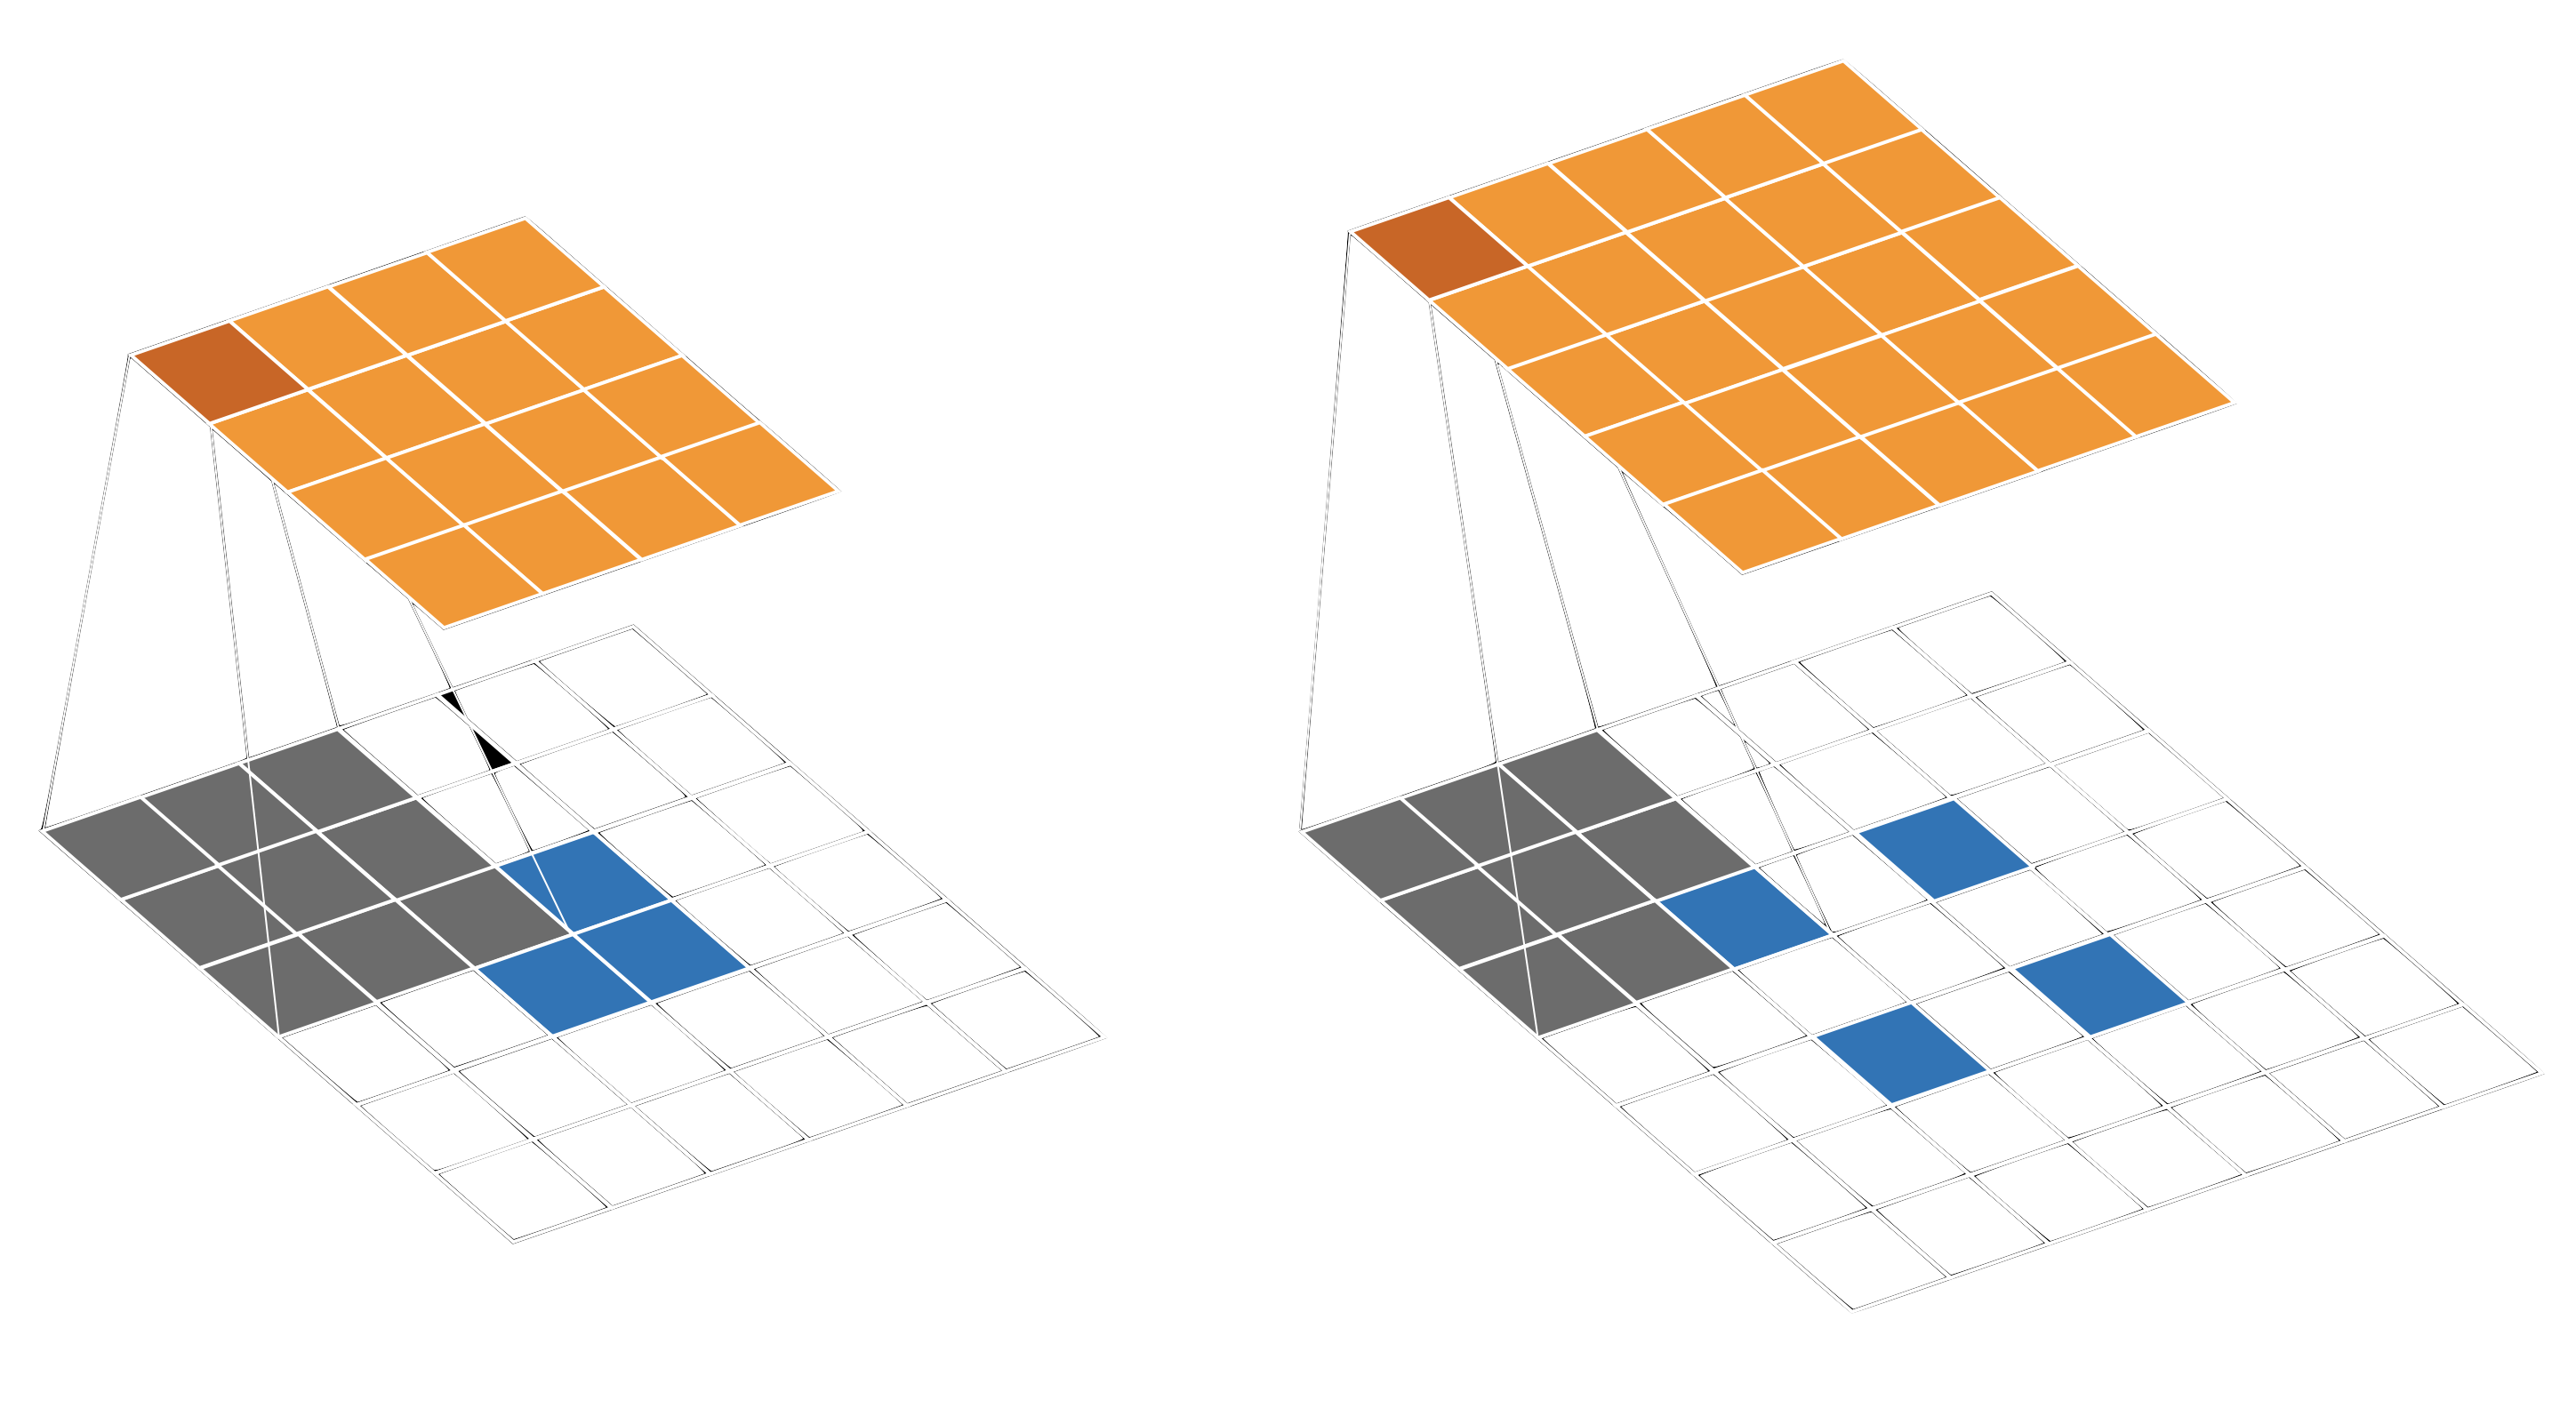 Deconvolution implemented with padding of the input and fractionally strided convolution.